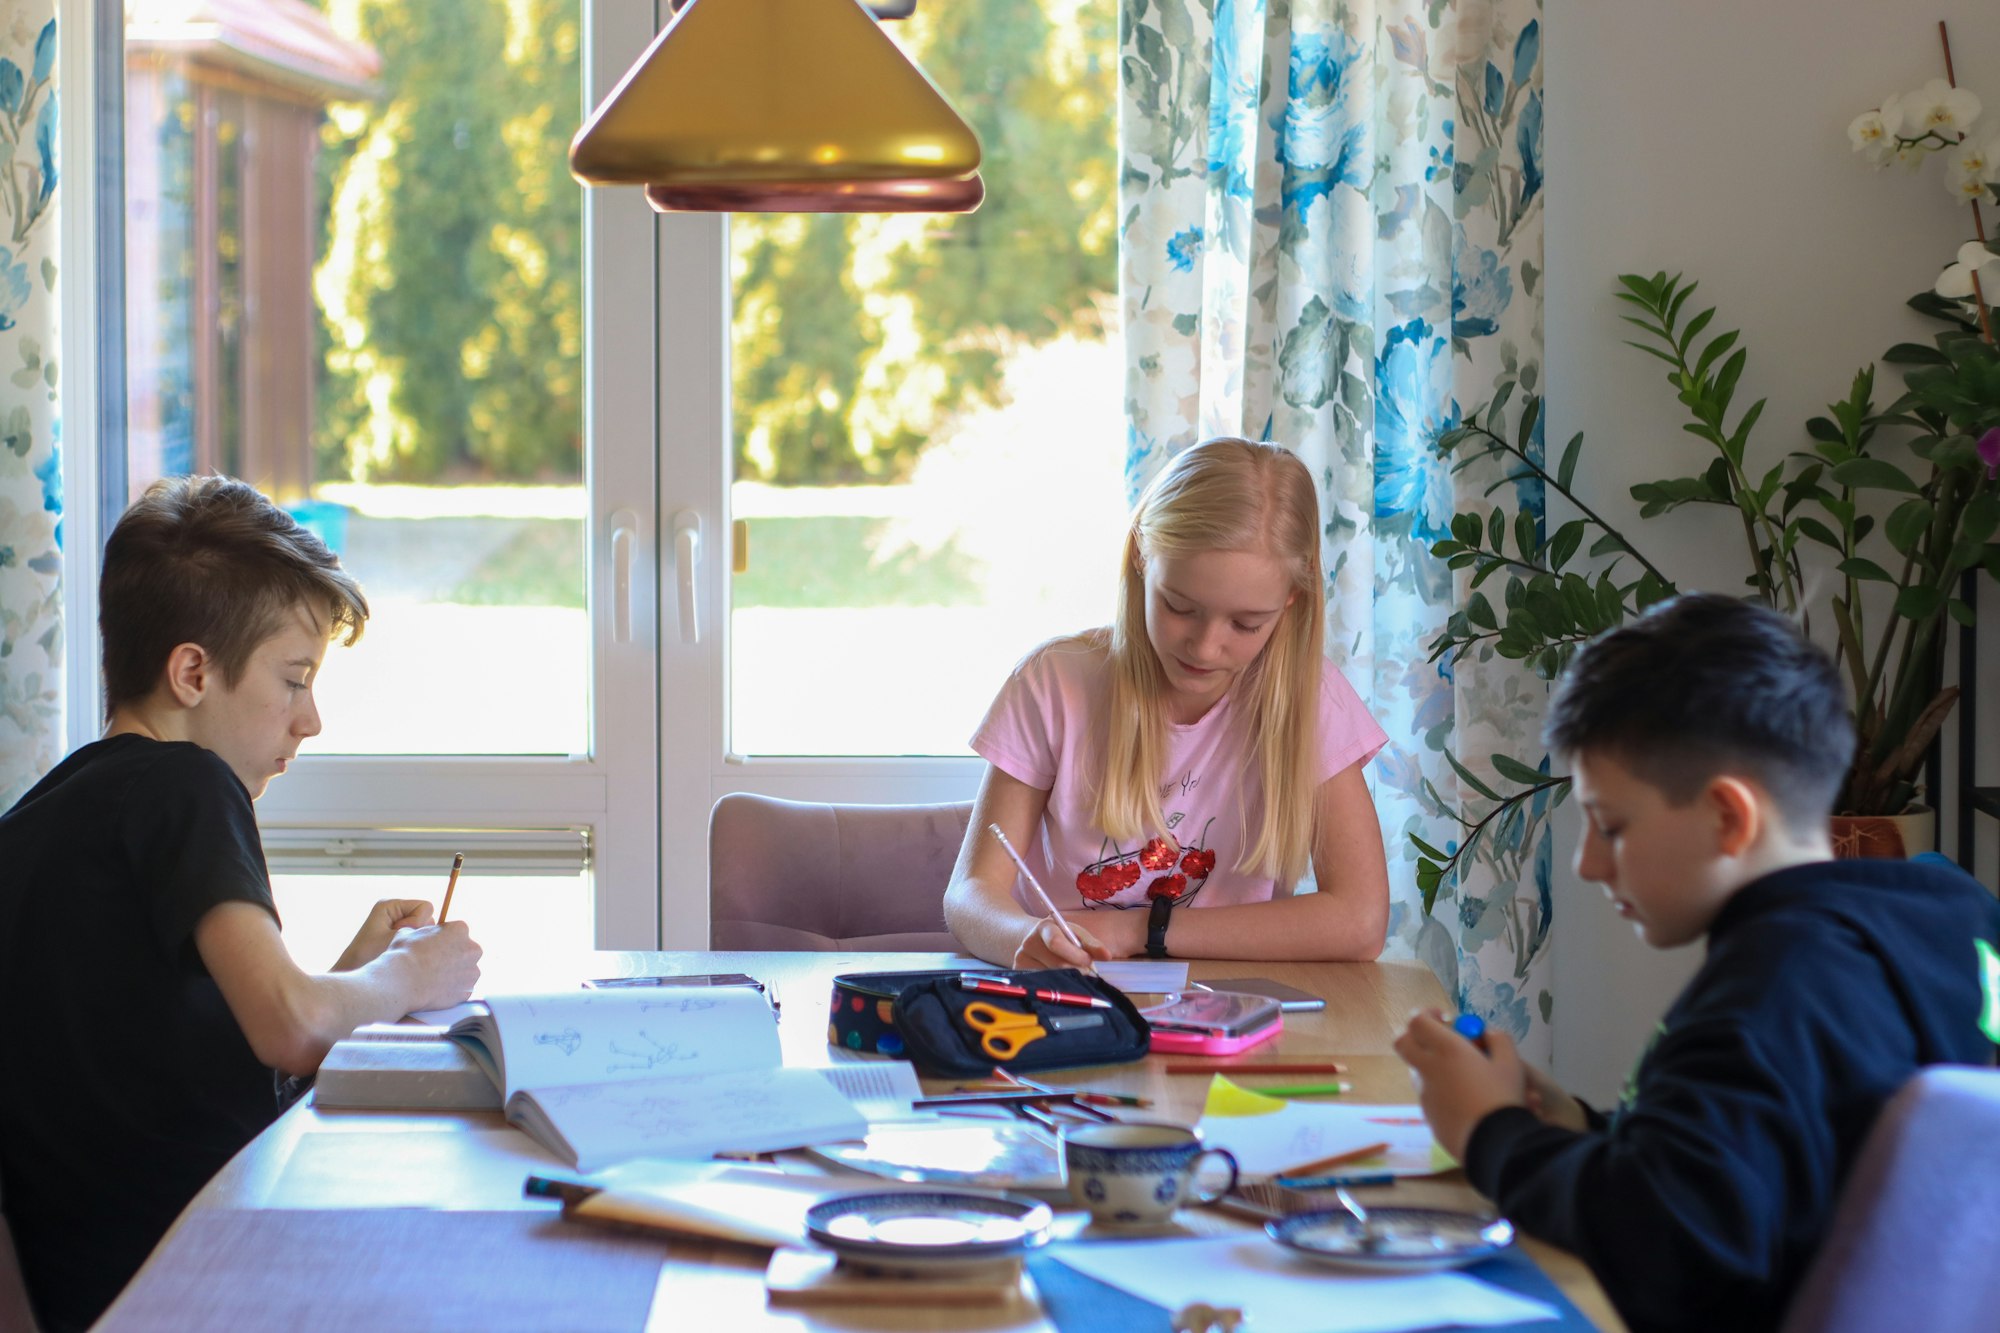 Children at home at the table do their homework, paint pictures, crafts, crafting, family at home.